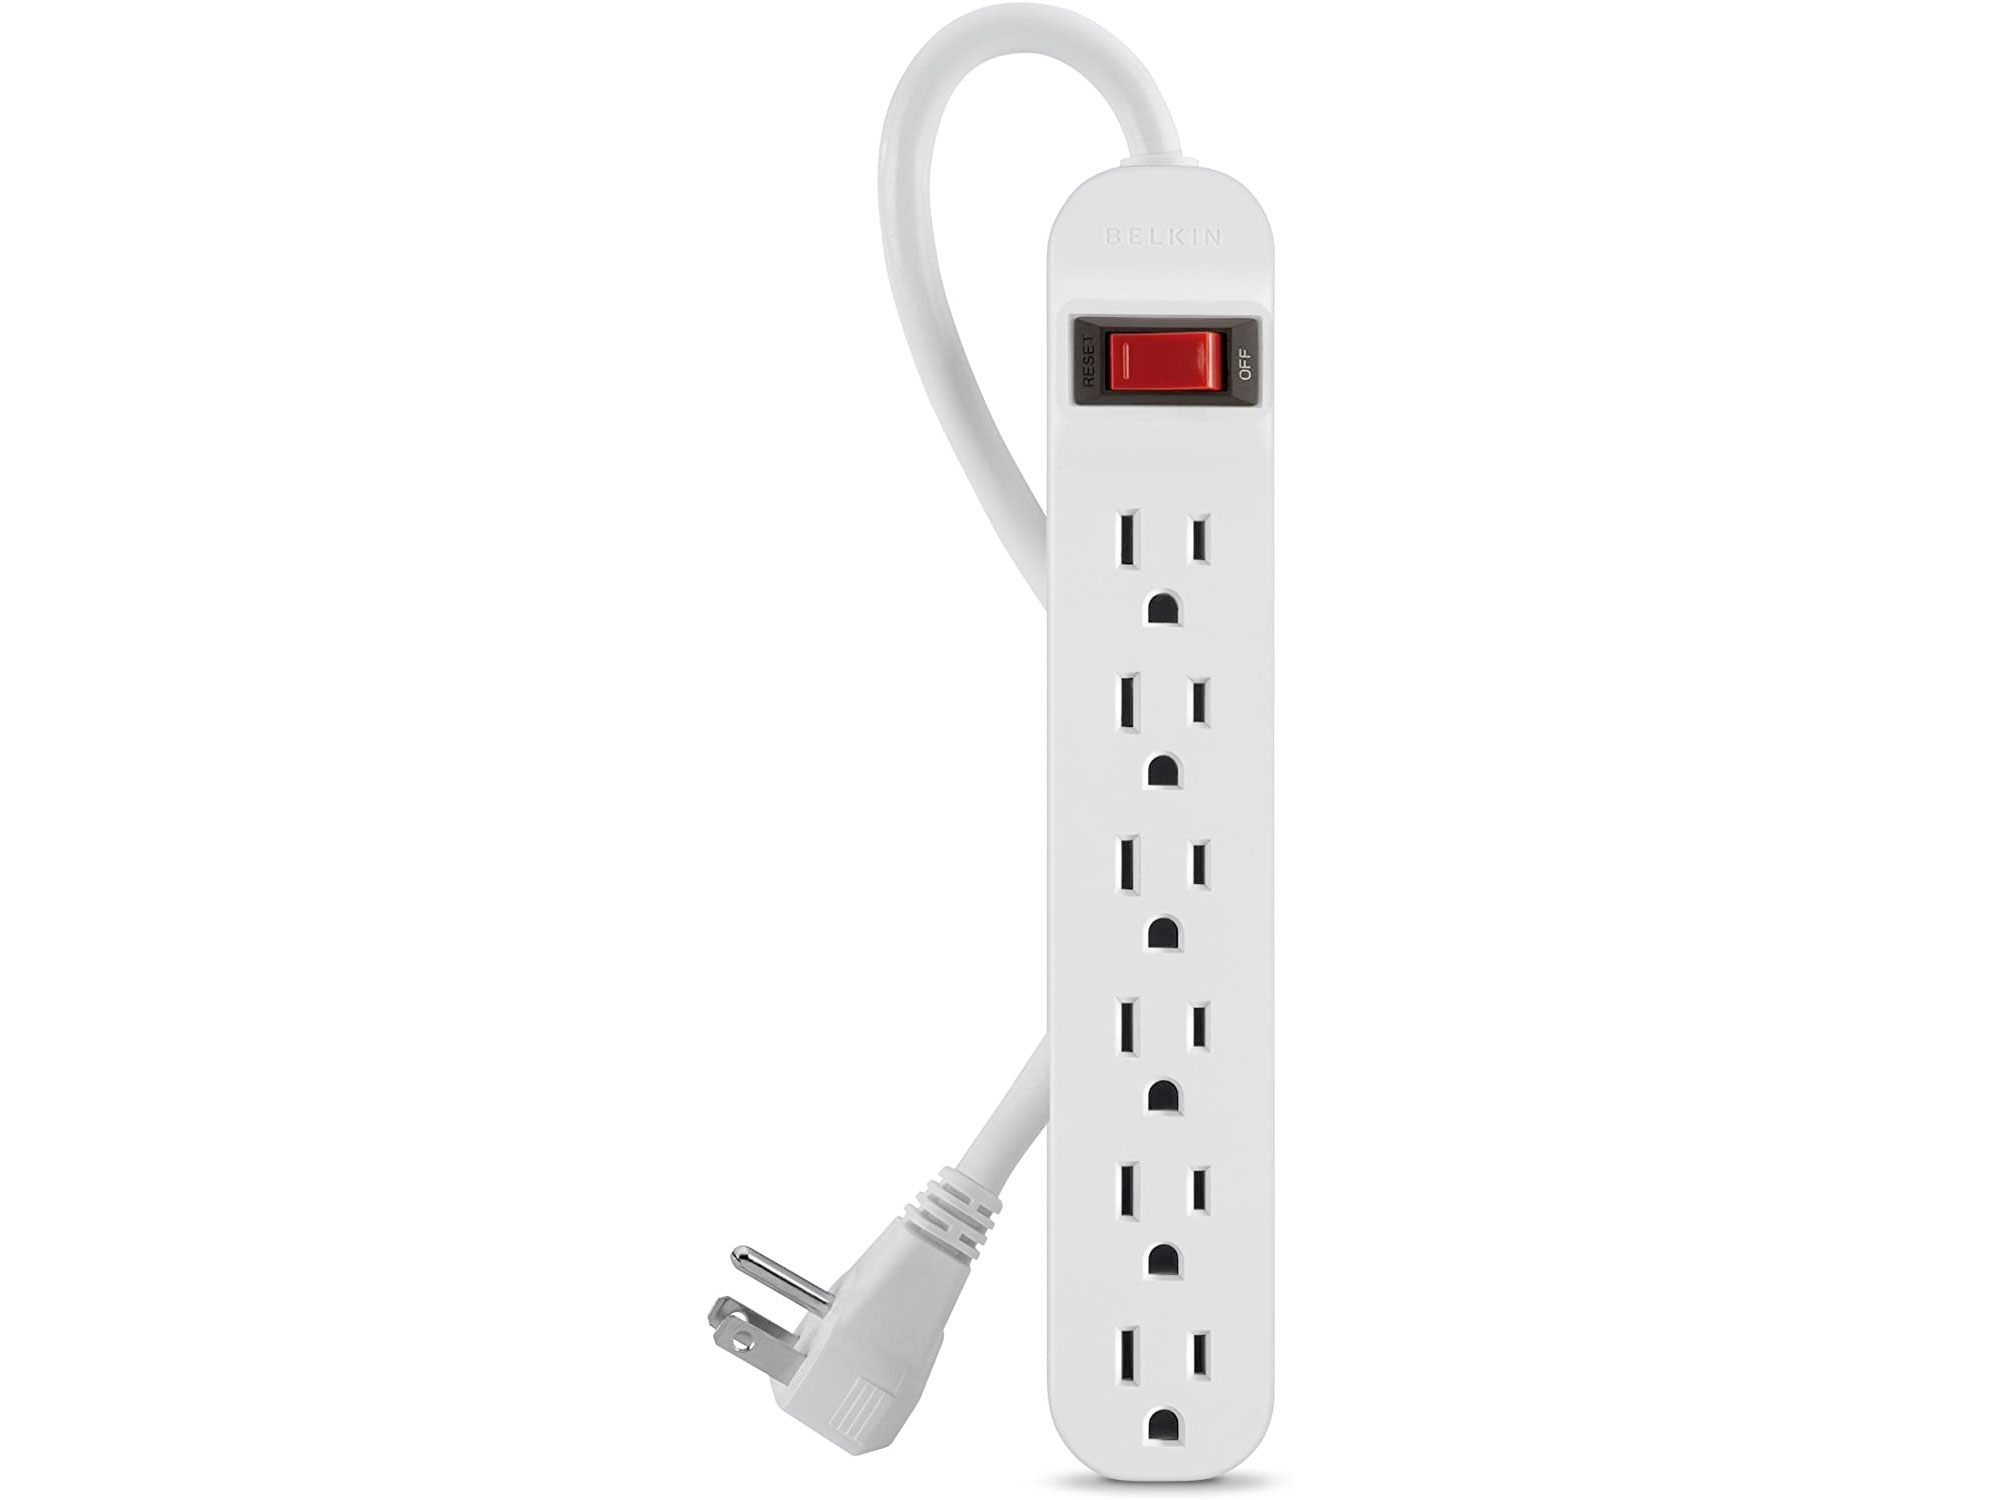 Amazon：Belkin 6-Outlet Surge Protector精選優惠